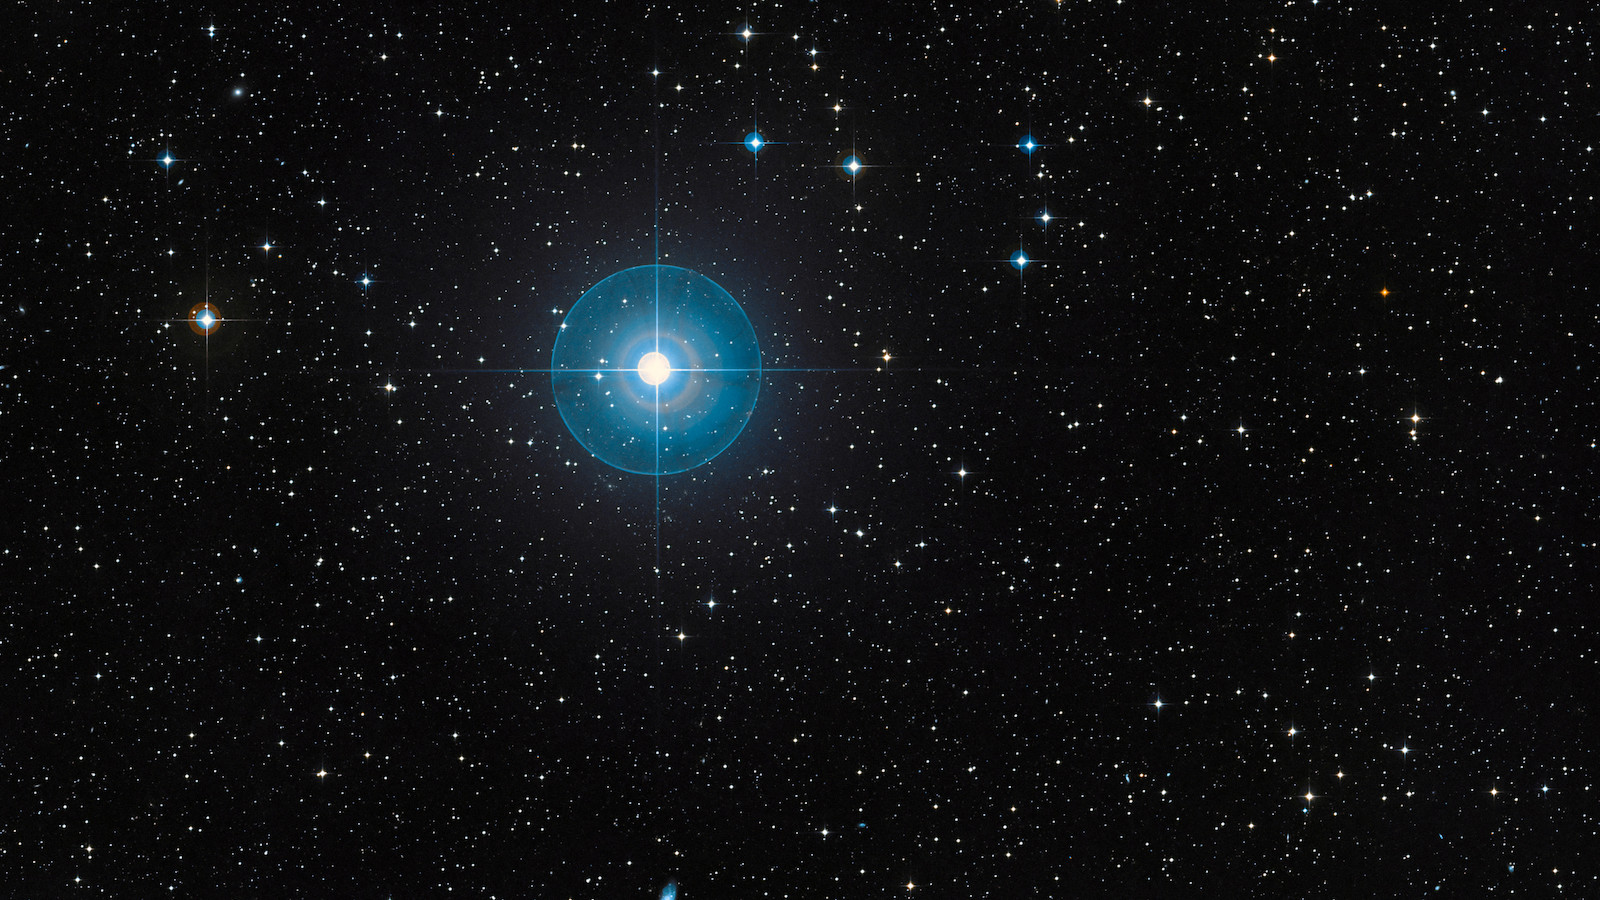 At the upper left of a dark, star-filled sky is a bright, bluish light. It is the star Beta Pictoris with a glow around it showing the surrounding disk of debris.